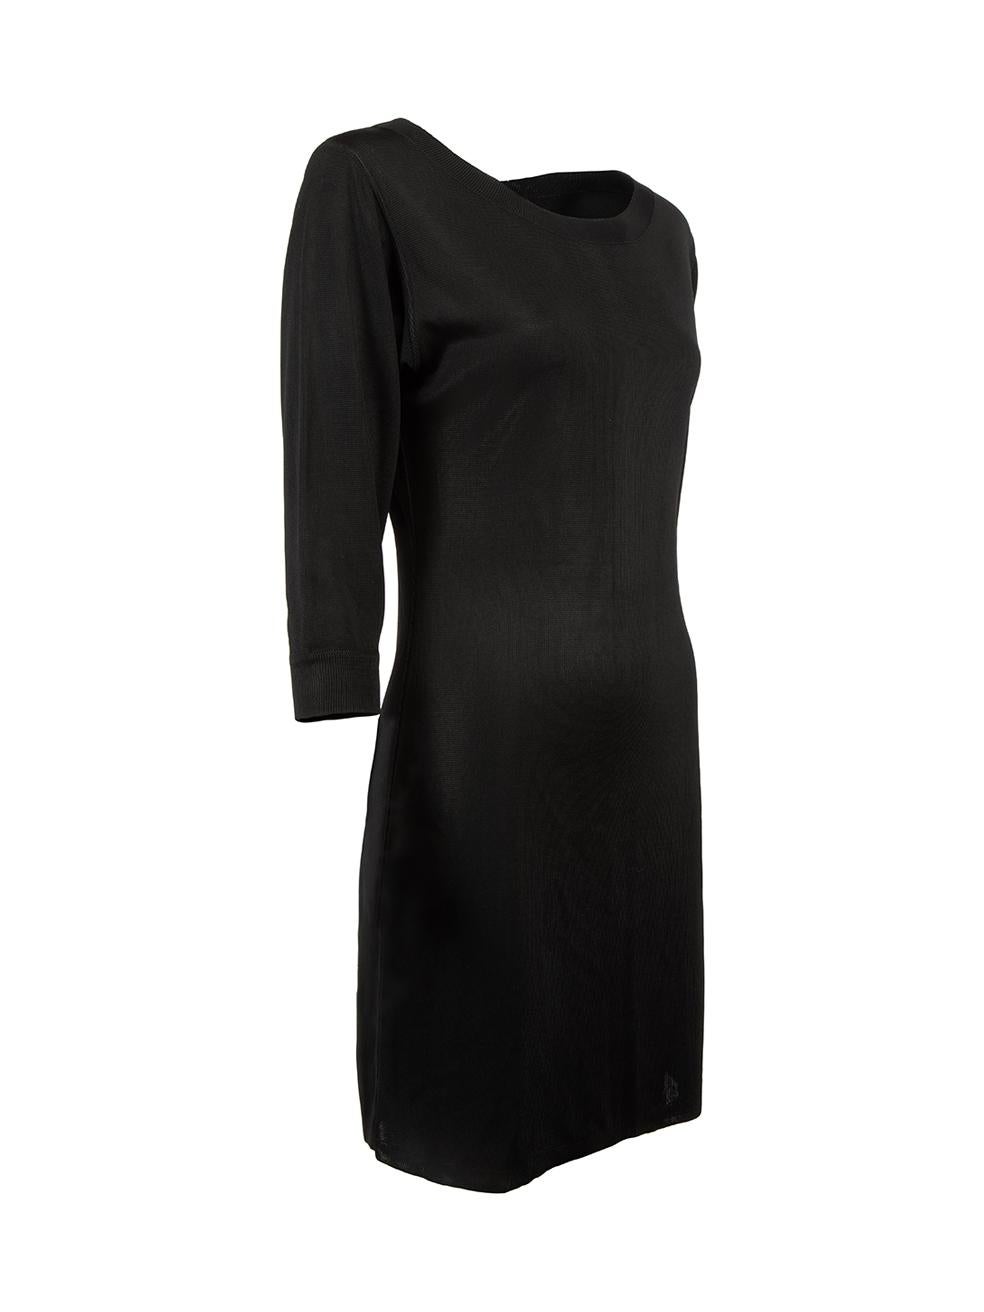 CONDITION is Very good. Minimal wear to dress is evident. Minimal wear along interior labels on this used Alaïa designer resale item. 



Details


Black

Synthetic

Mini knitted dress

Round neckline

Slightly see through

Back snap button up